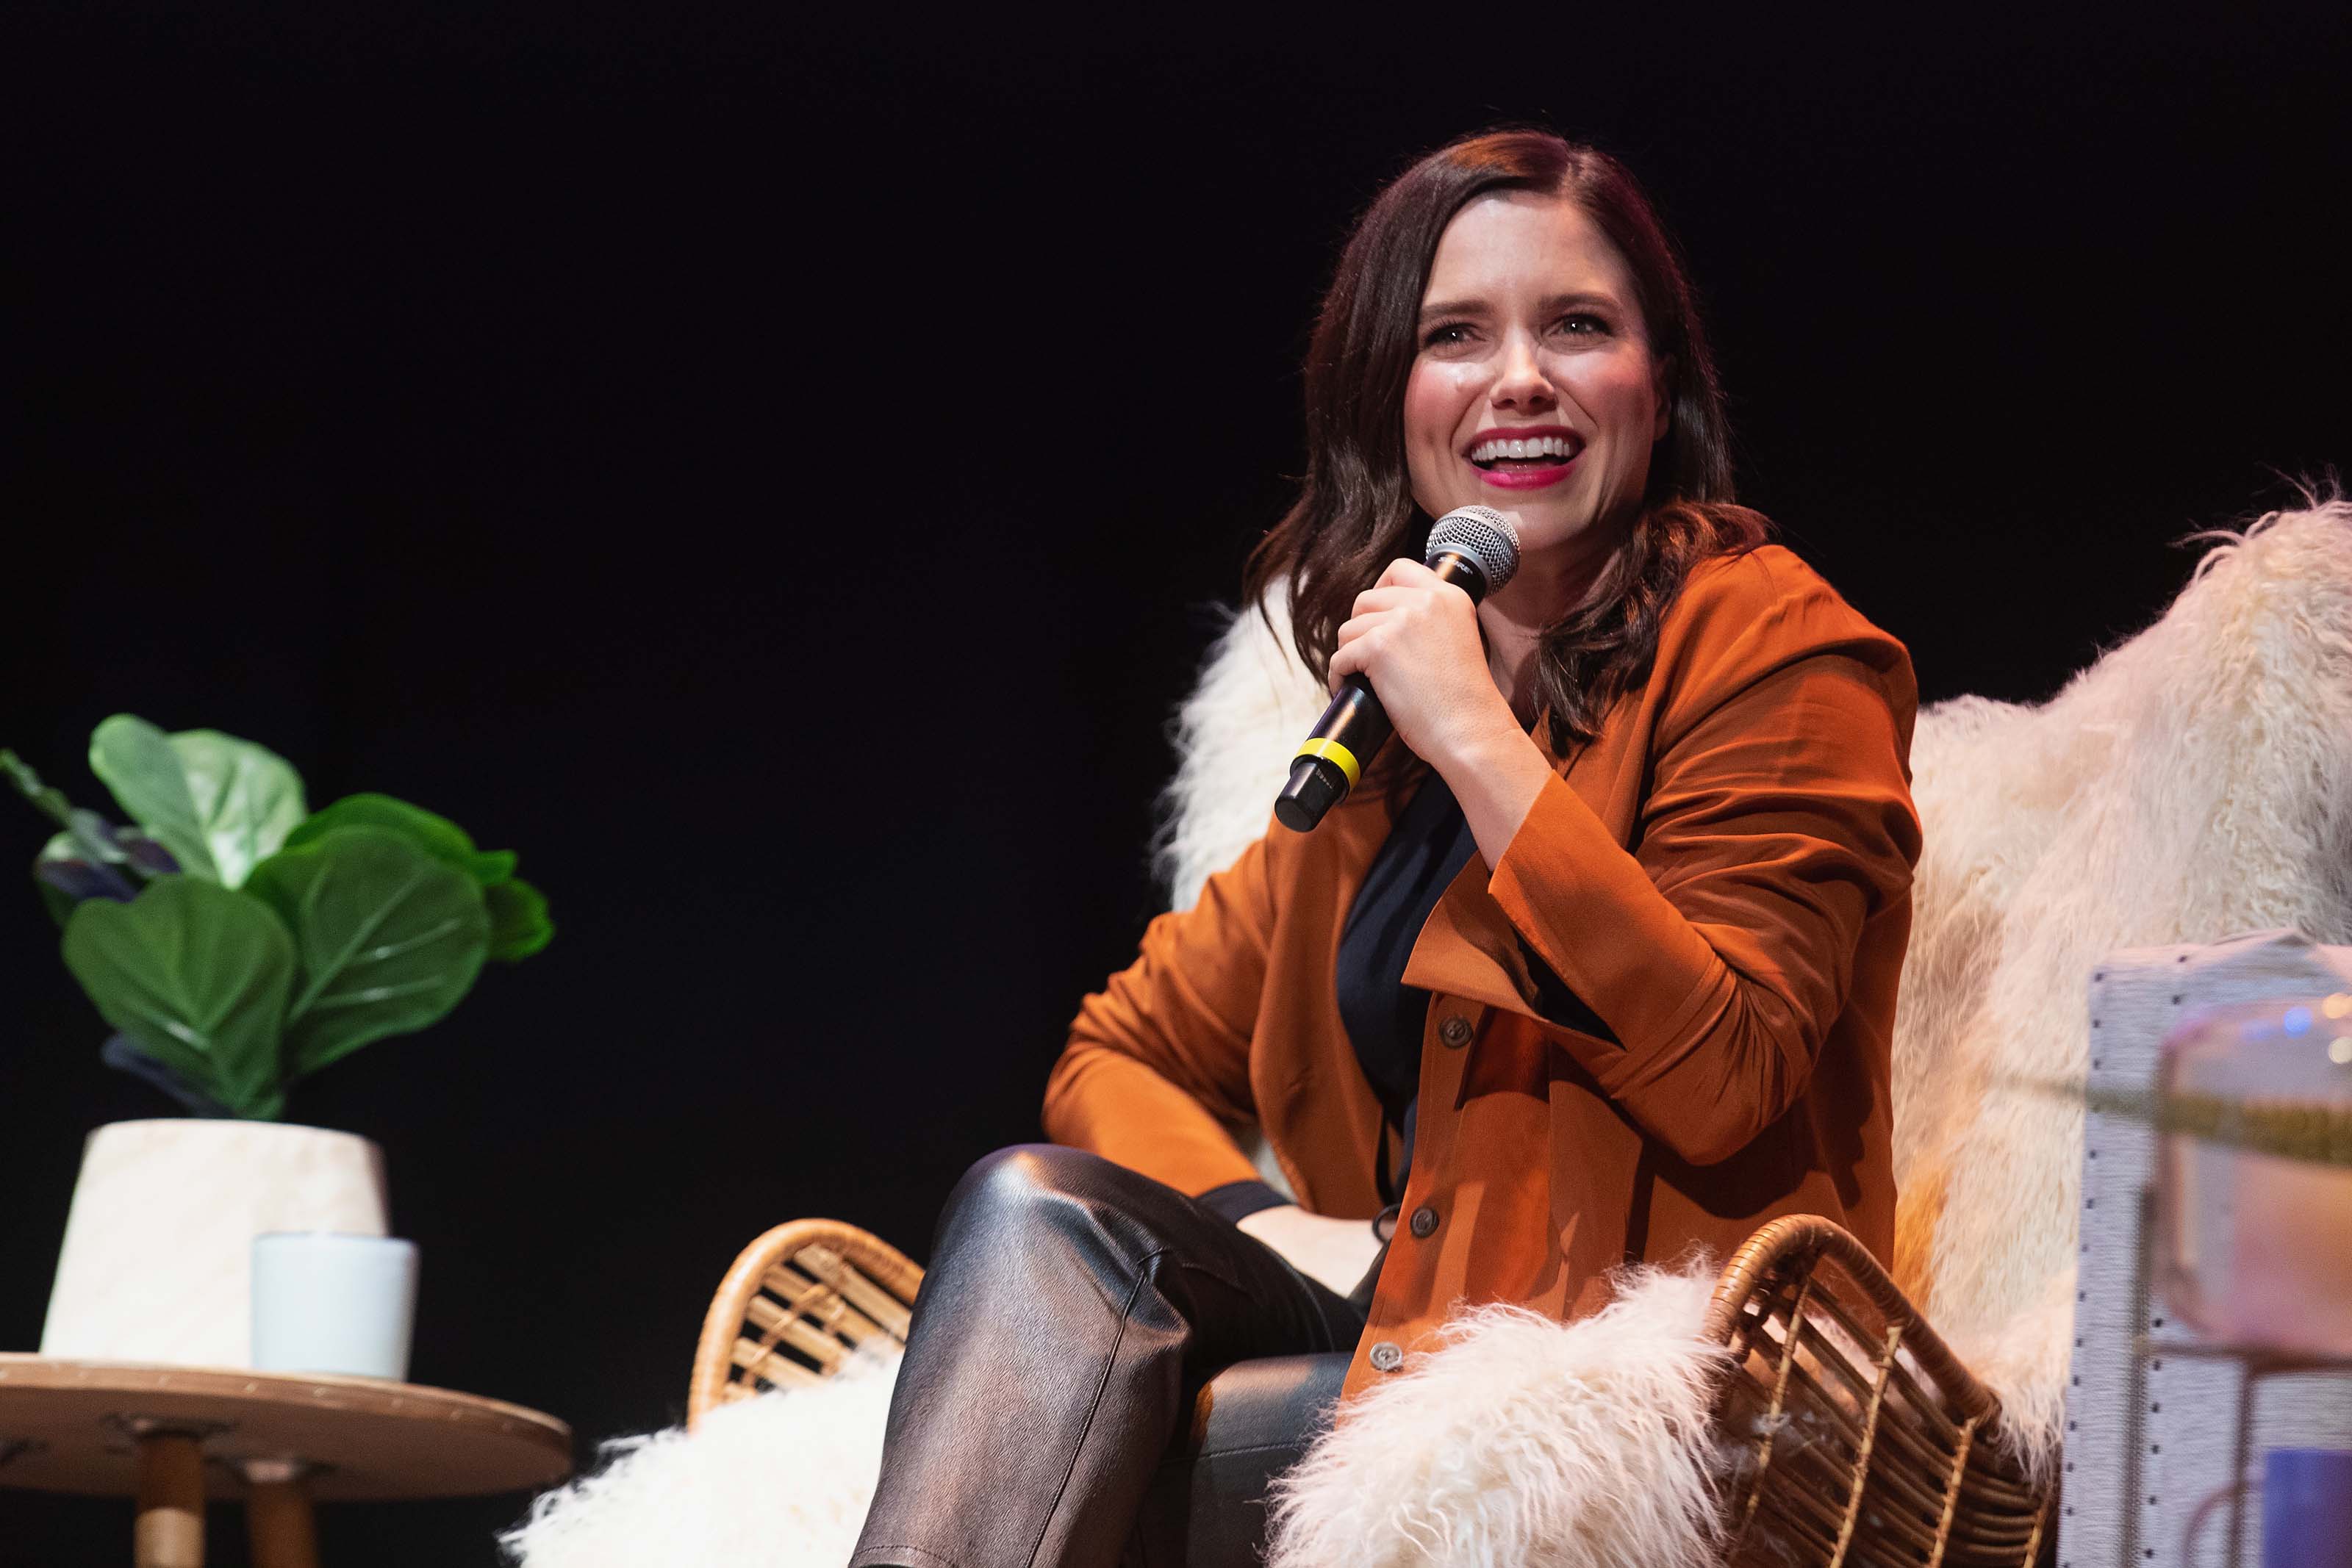 Sophia Bush attends Together Live in Seattle